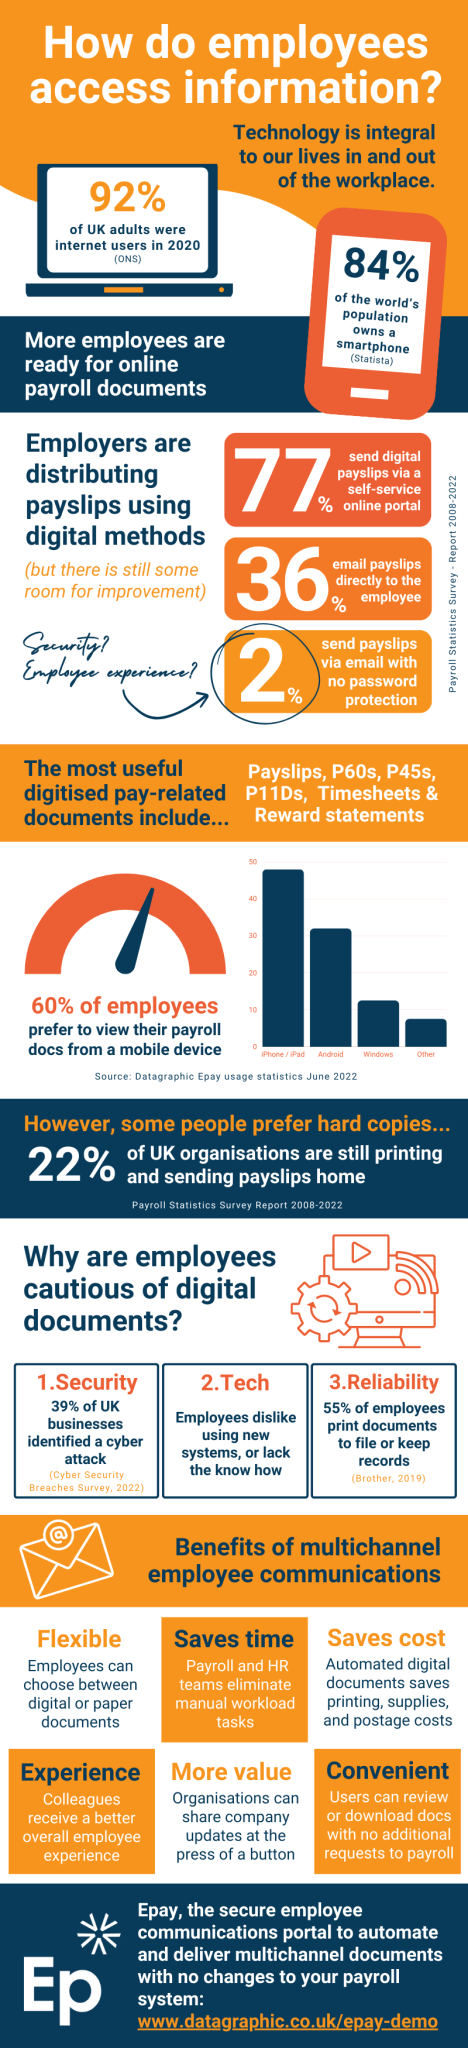 How do employees access payroll information?